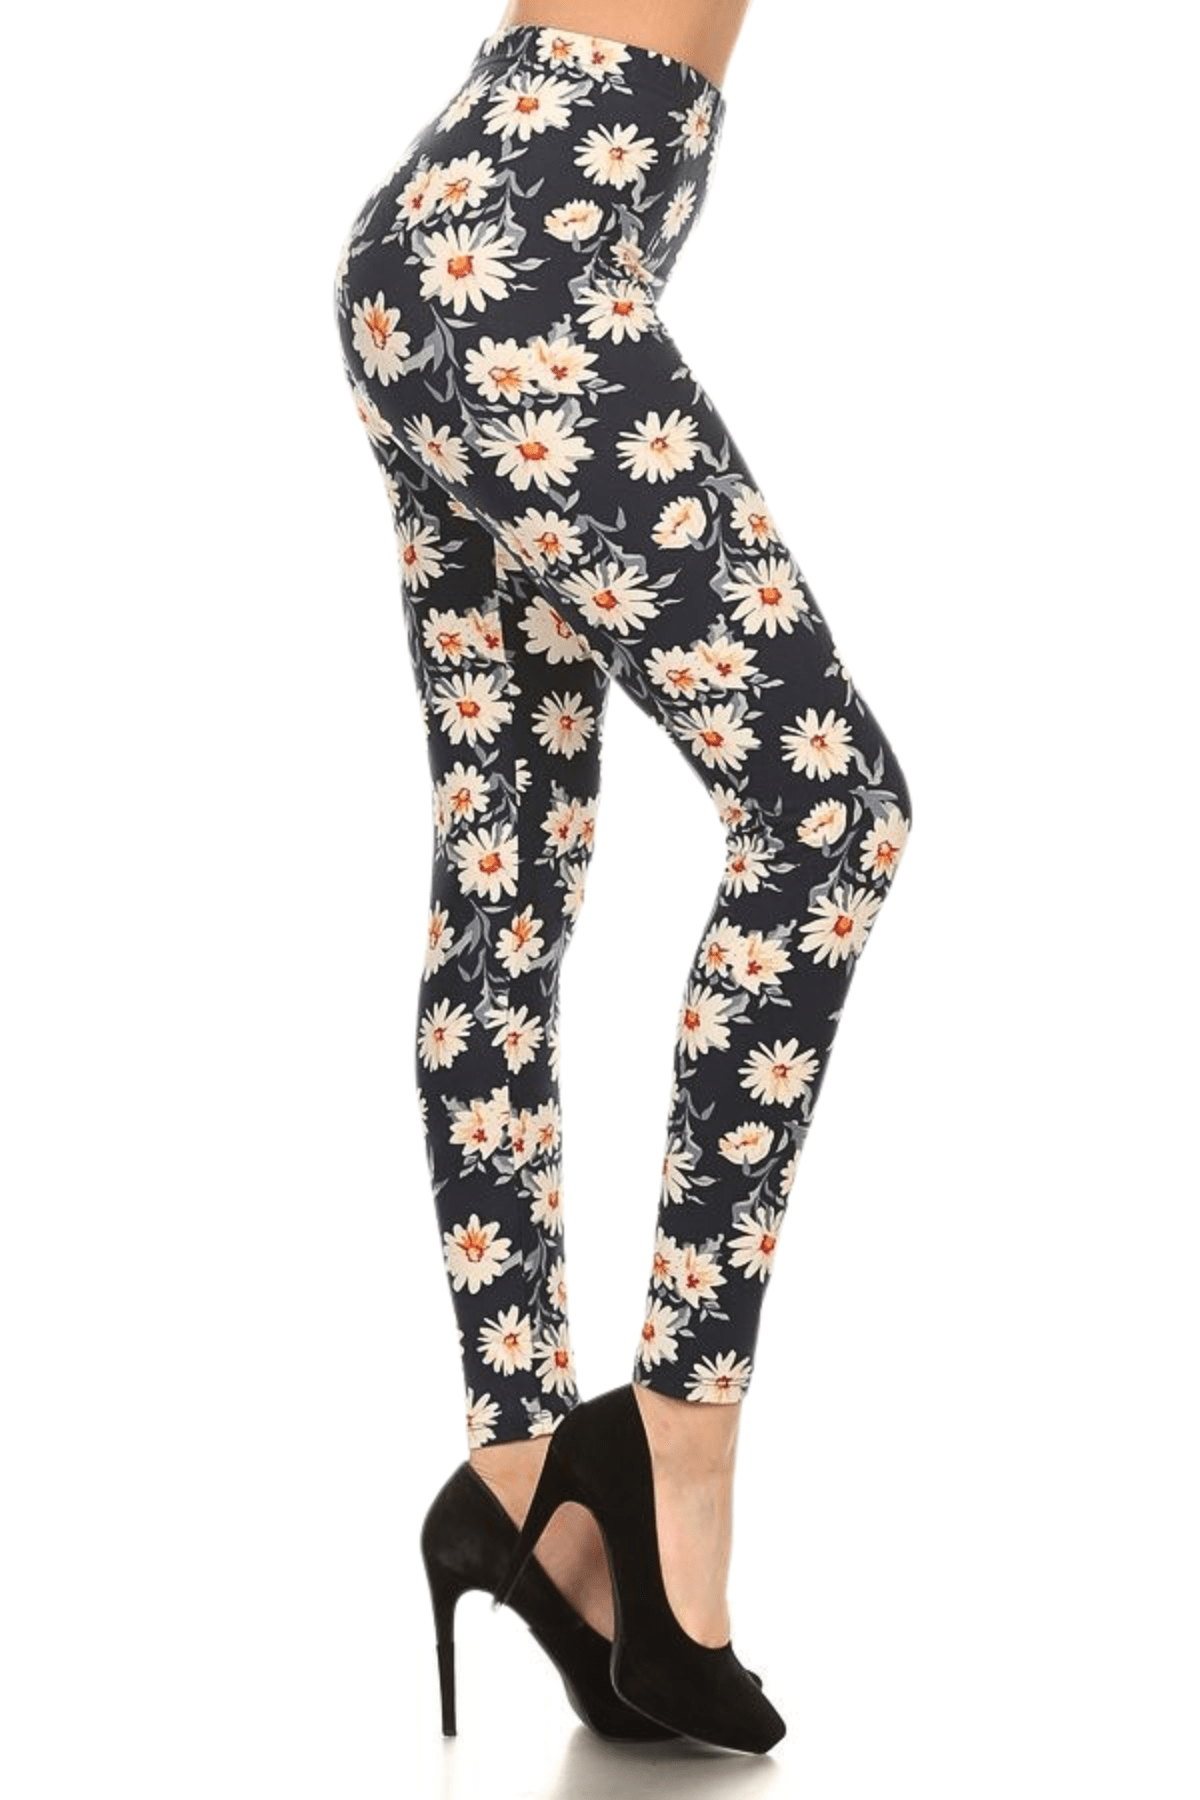 oolala Leggings Starlit Daisies 🦋 oolala ButterflySoft™ | Paw-some Limited Edition Women's Leggings